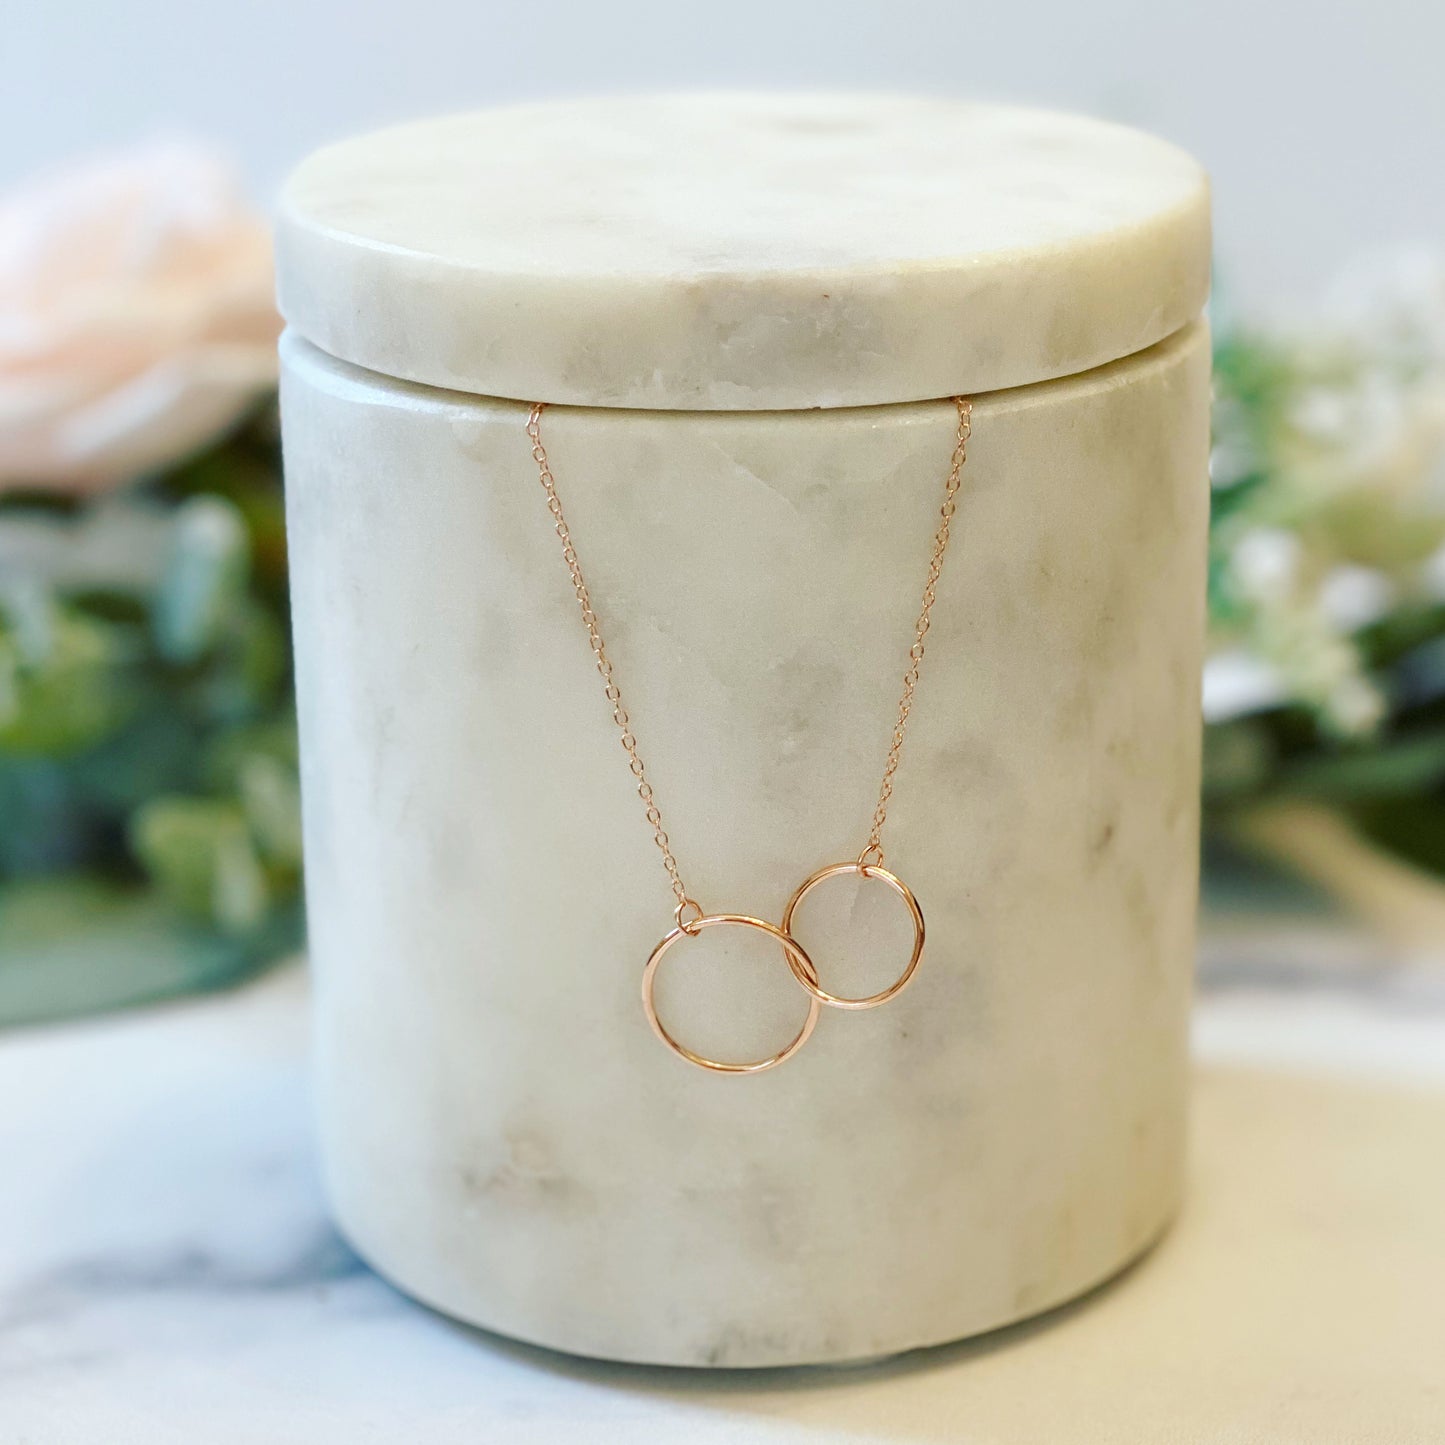 Today a Bride, mother of the bride Infinity necklace!